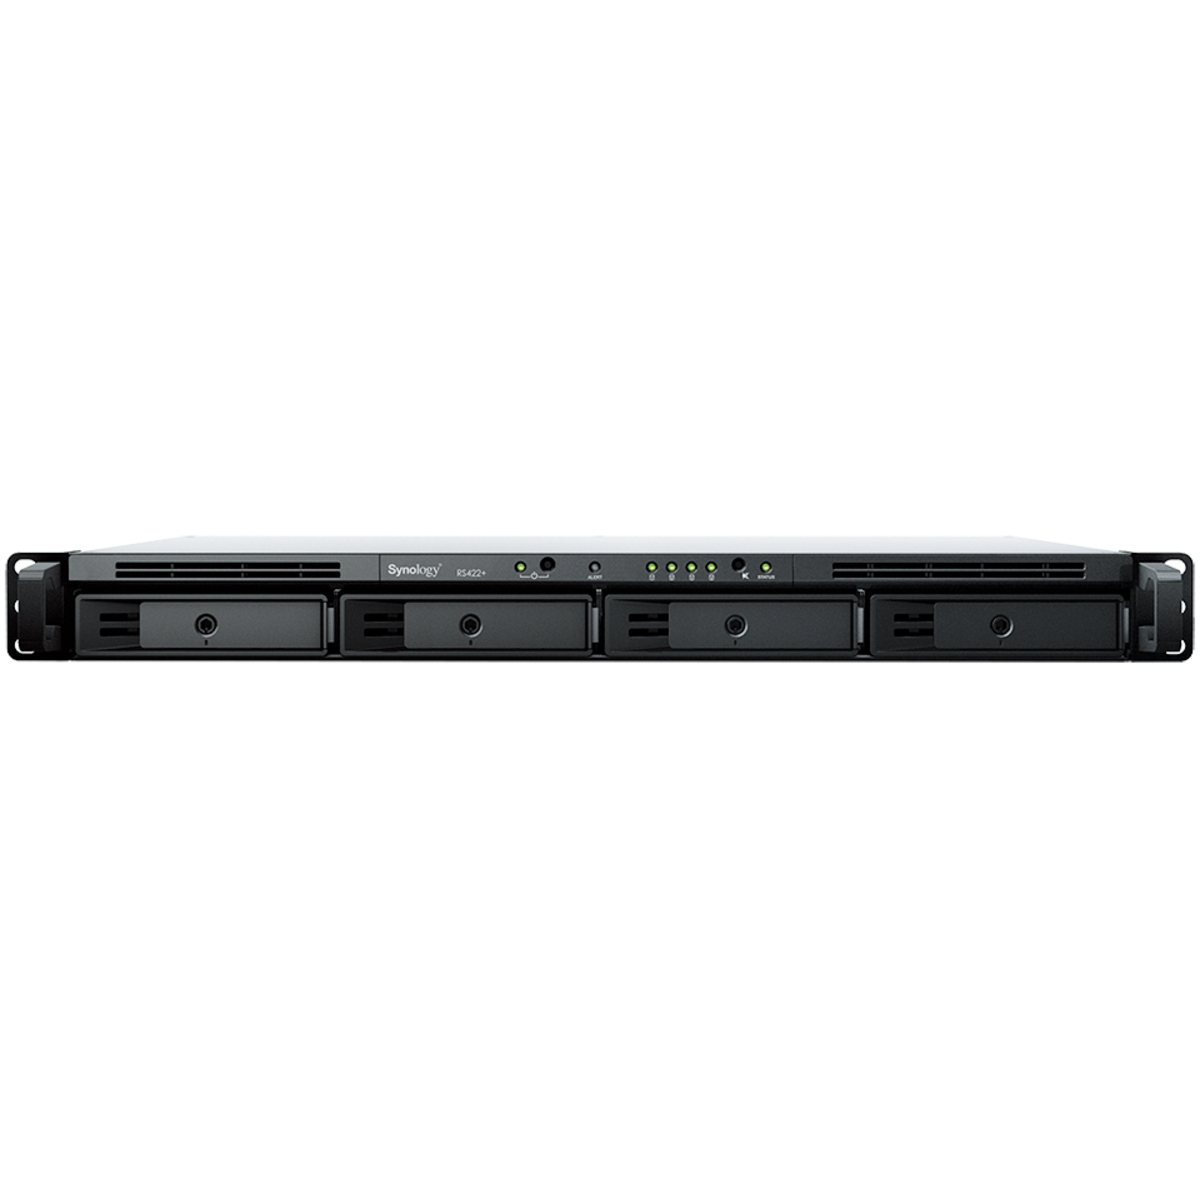 buy Synology RackStation RS422+ 88tb RackMount NAS - Network Attached Storage Device 4x22000gb Seagate IronWolf Pro ST22000NT001 3.5 7200rpm SATA 6Gb/s HDD NAS Class Drives Installed - Burn-In Tested - ON SALE - nas headquarters buy network attached storage server device das new raid-5 free shipping simply usa christmas holiday black friday cyber monday week sale happening now! RackStation RS422+